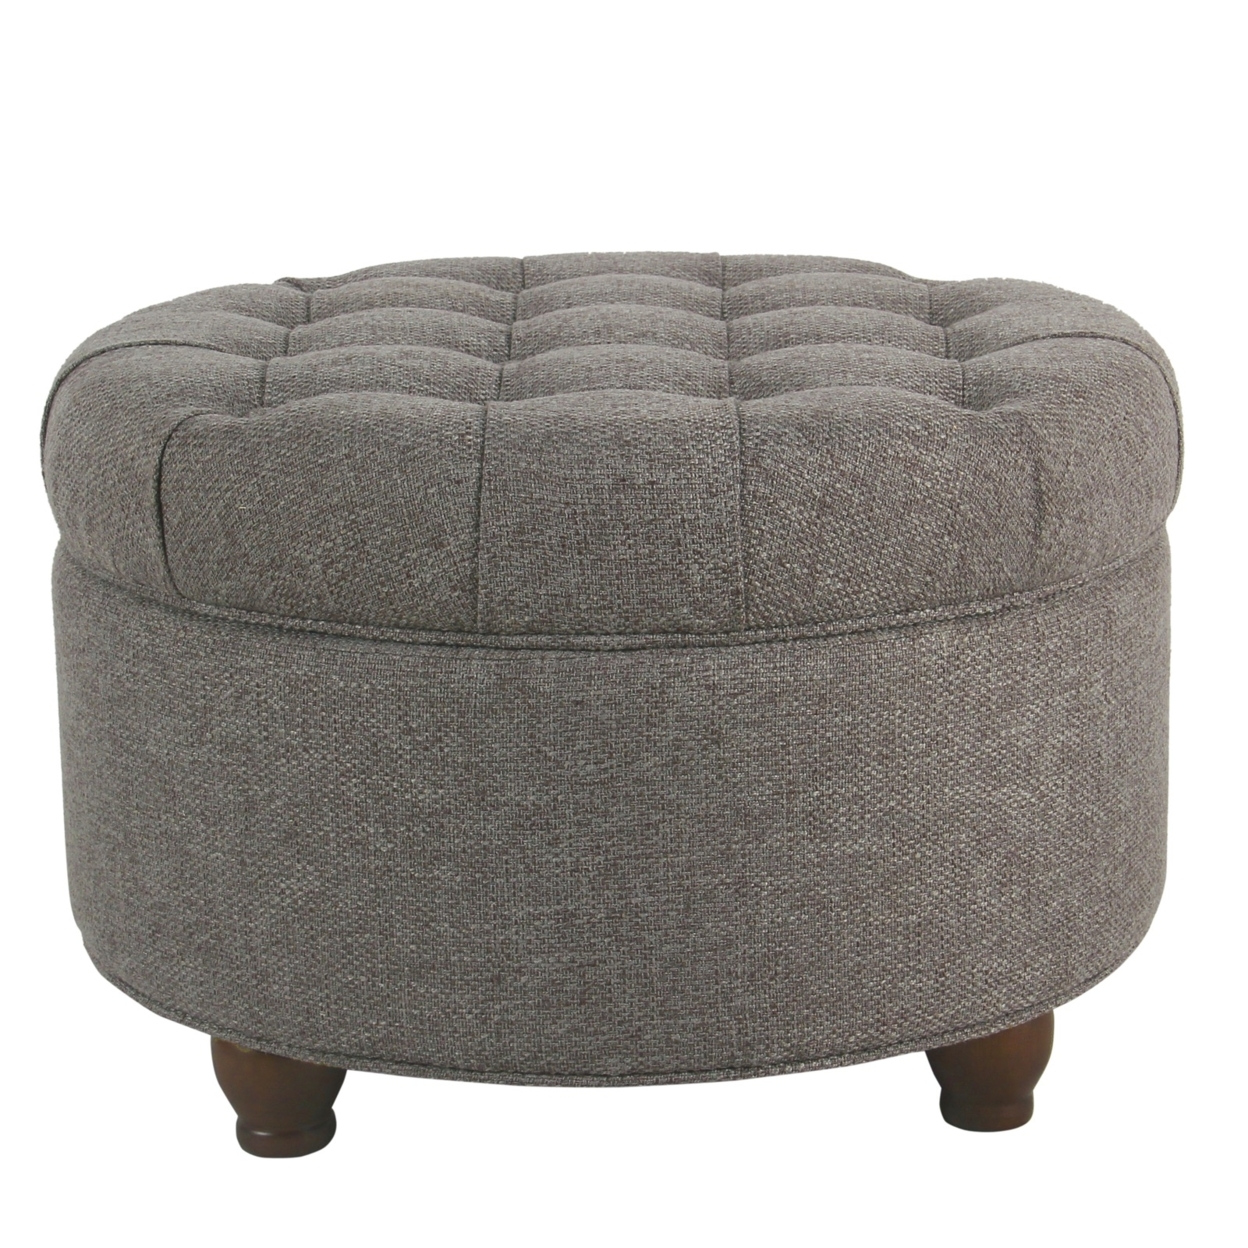 Fabric Upholstered Wooden Ottoman With Tufted Lift Off Lid Storage, Dark Gray- Saltoro Sherpi